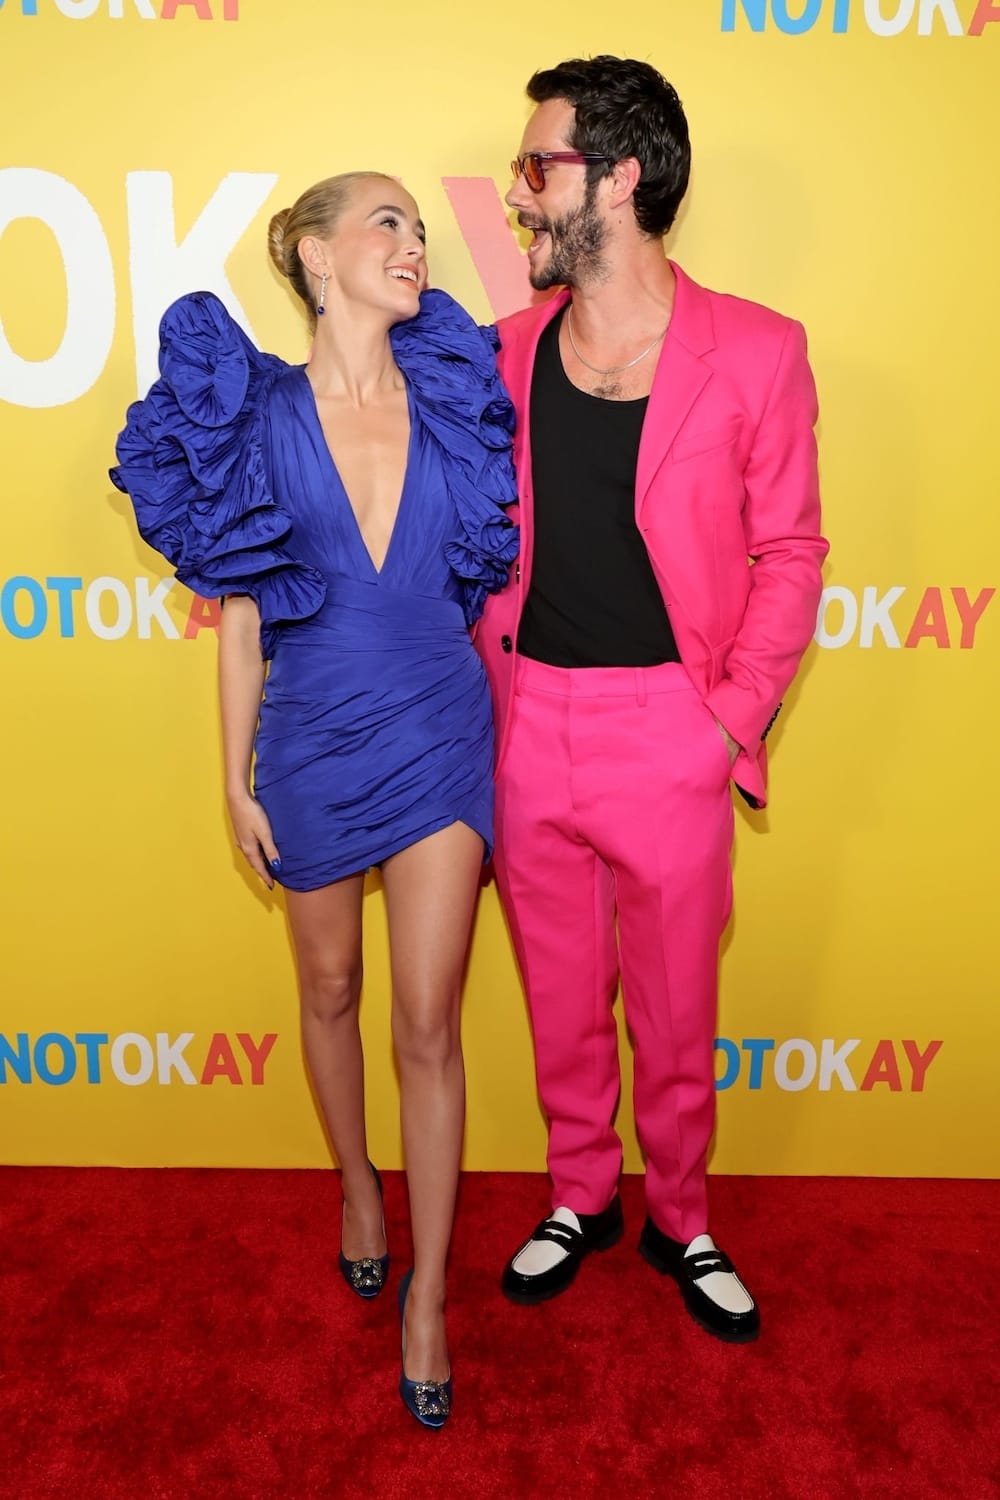 Zoey Deutch and Dylan O'Brien on the red carpet of ‘Not Okay’ premiere on July 28, 2022 in New York City.